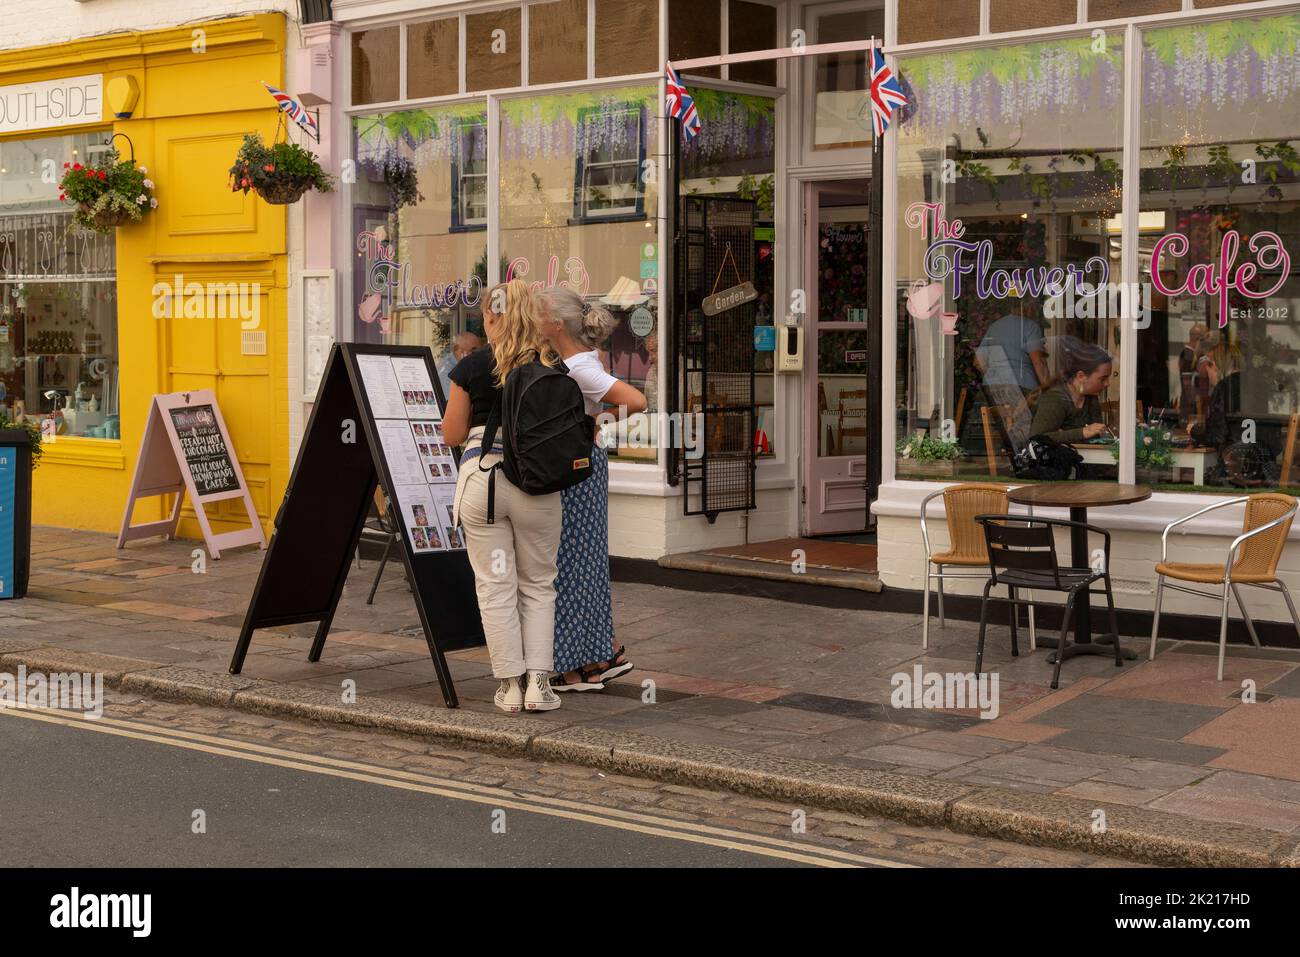 Plymouth, Devon, England, UK. 2022. Women reading a menu on the pavement outside a cafe in the Brabican area of the city. Plymouth, England. Stock Photo